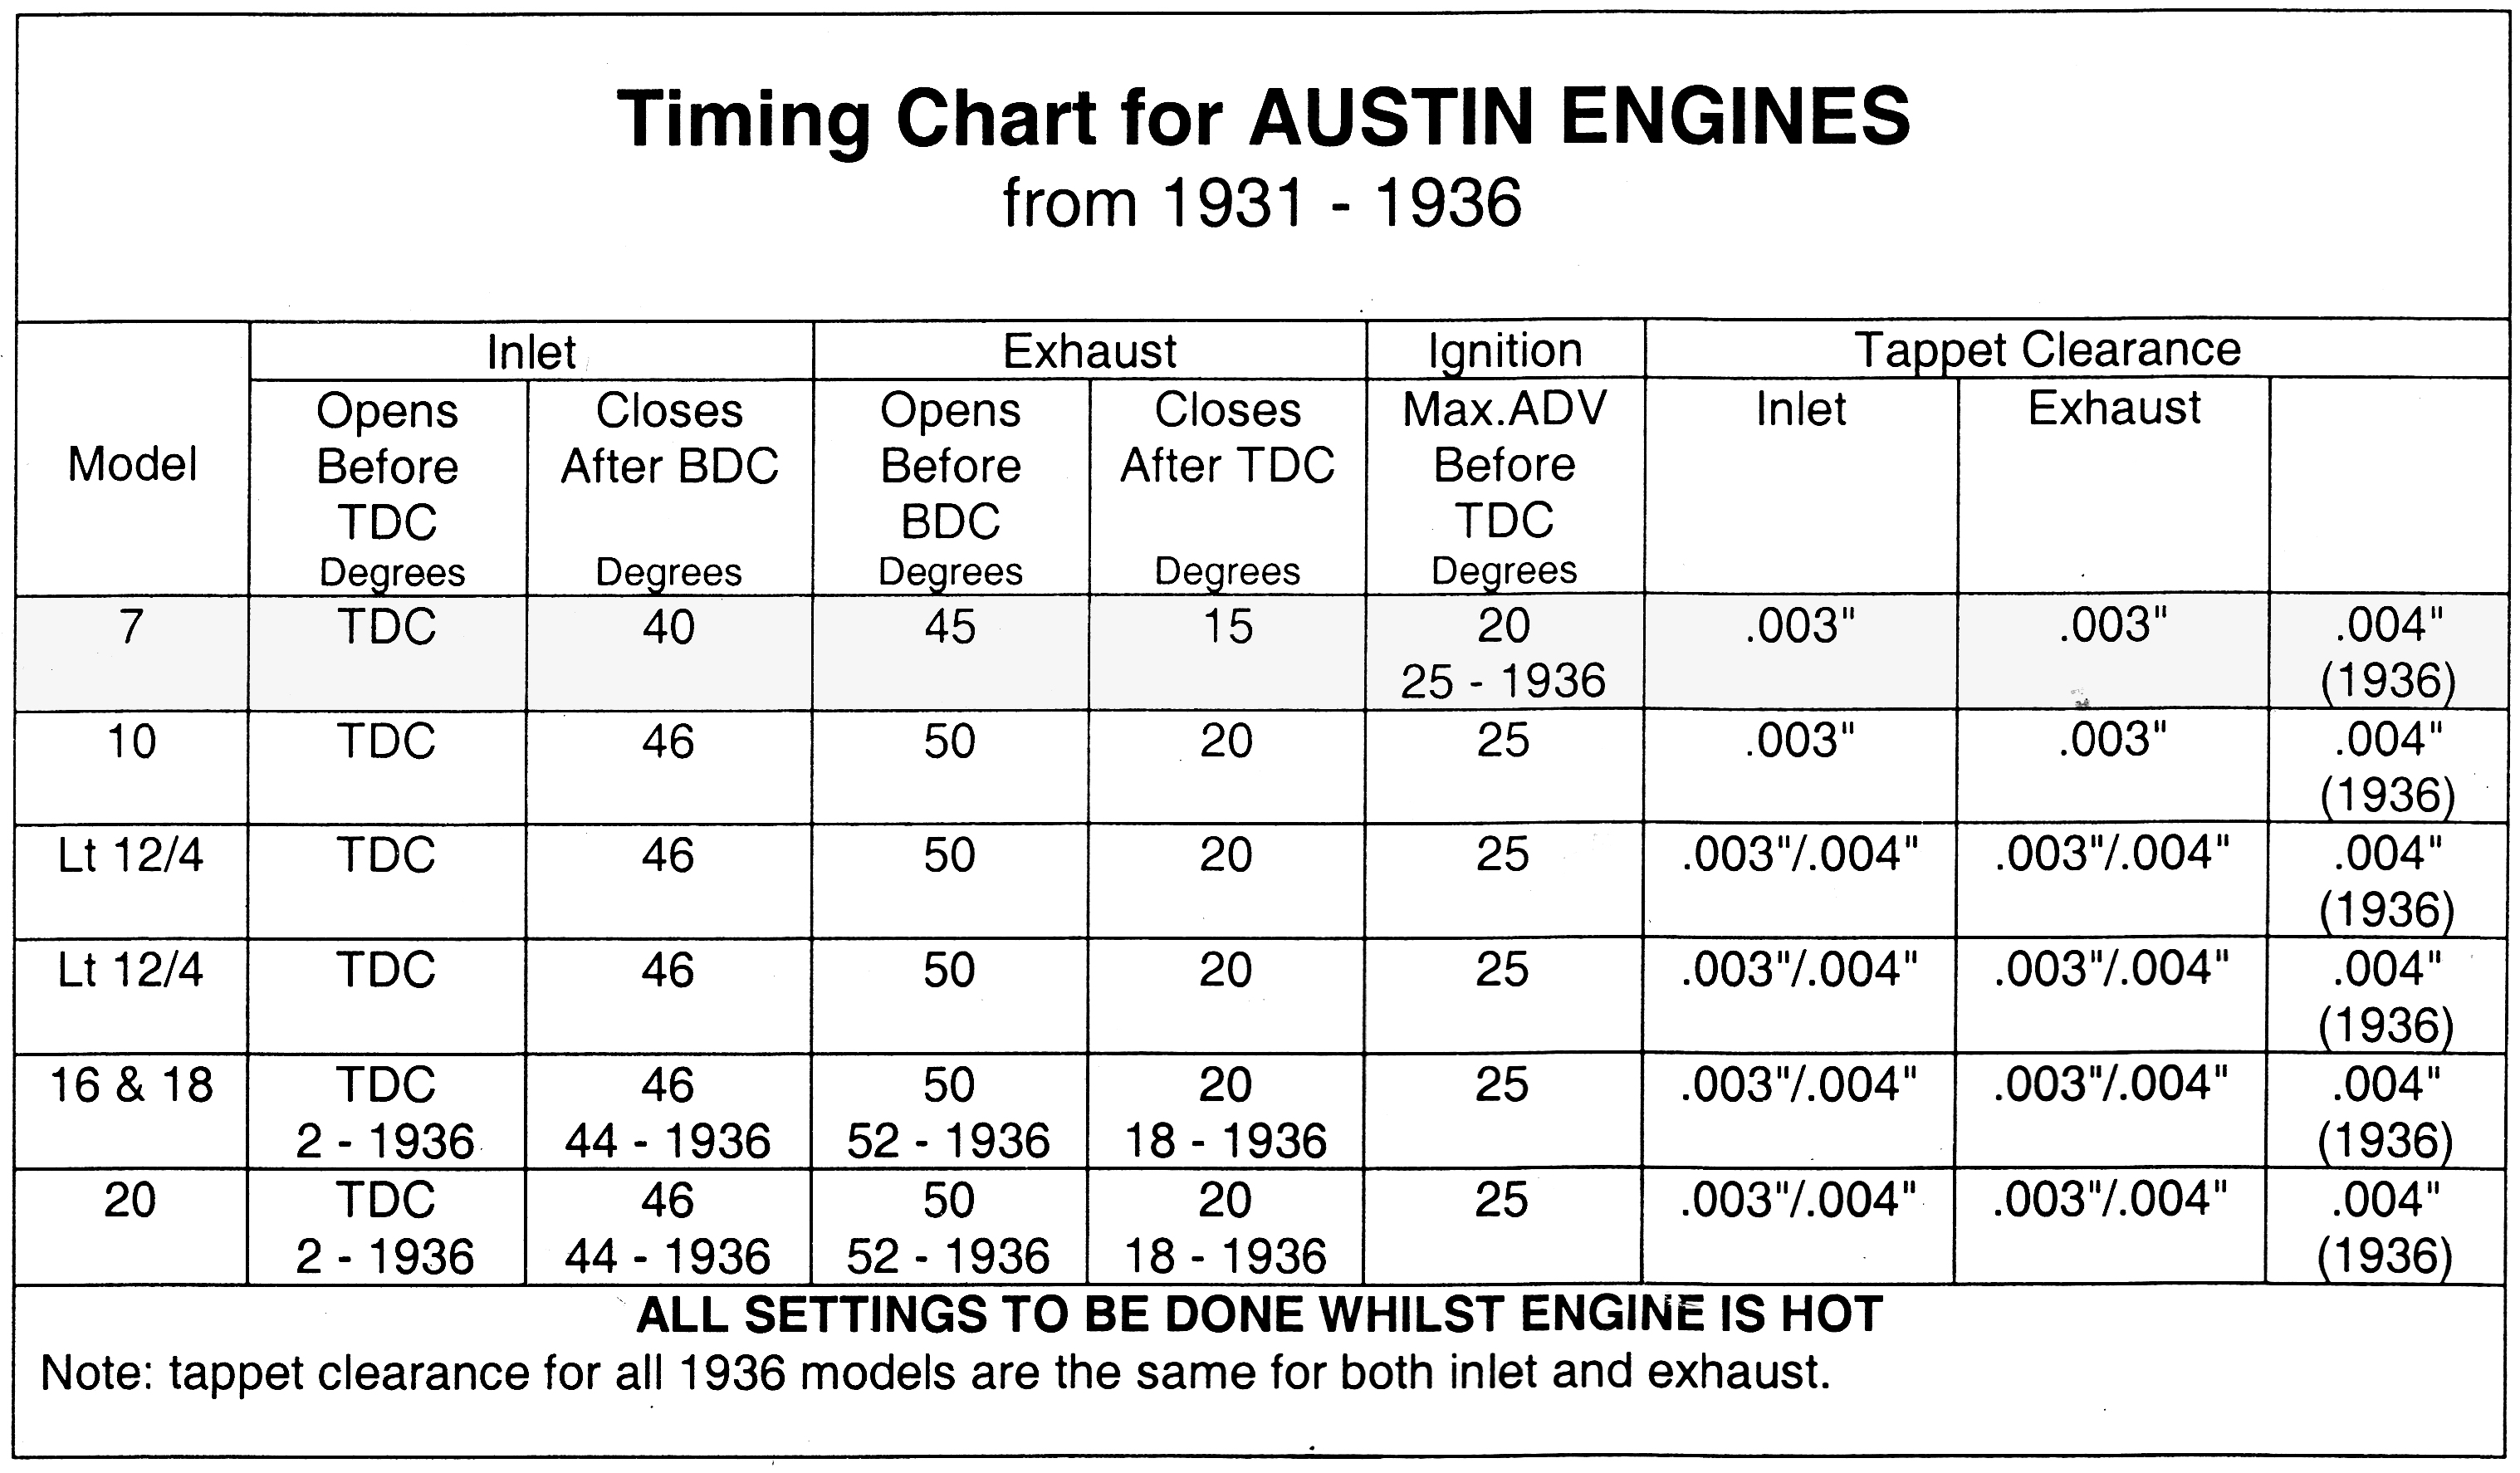 TIMING CHART FOR AUSTIN ENGINES